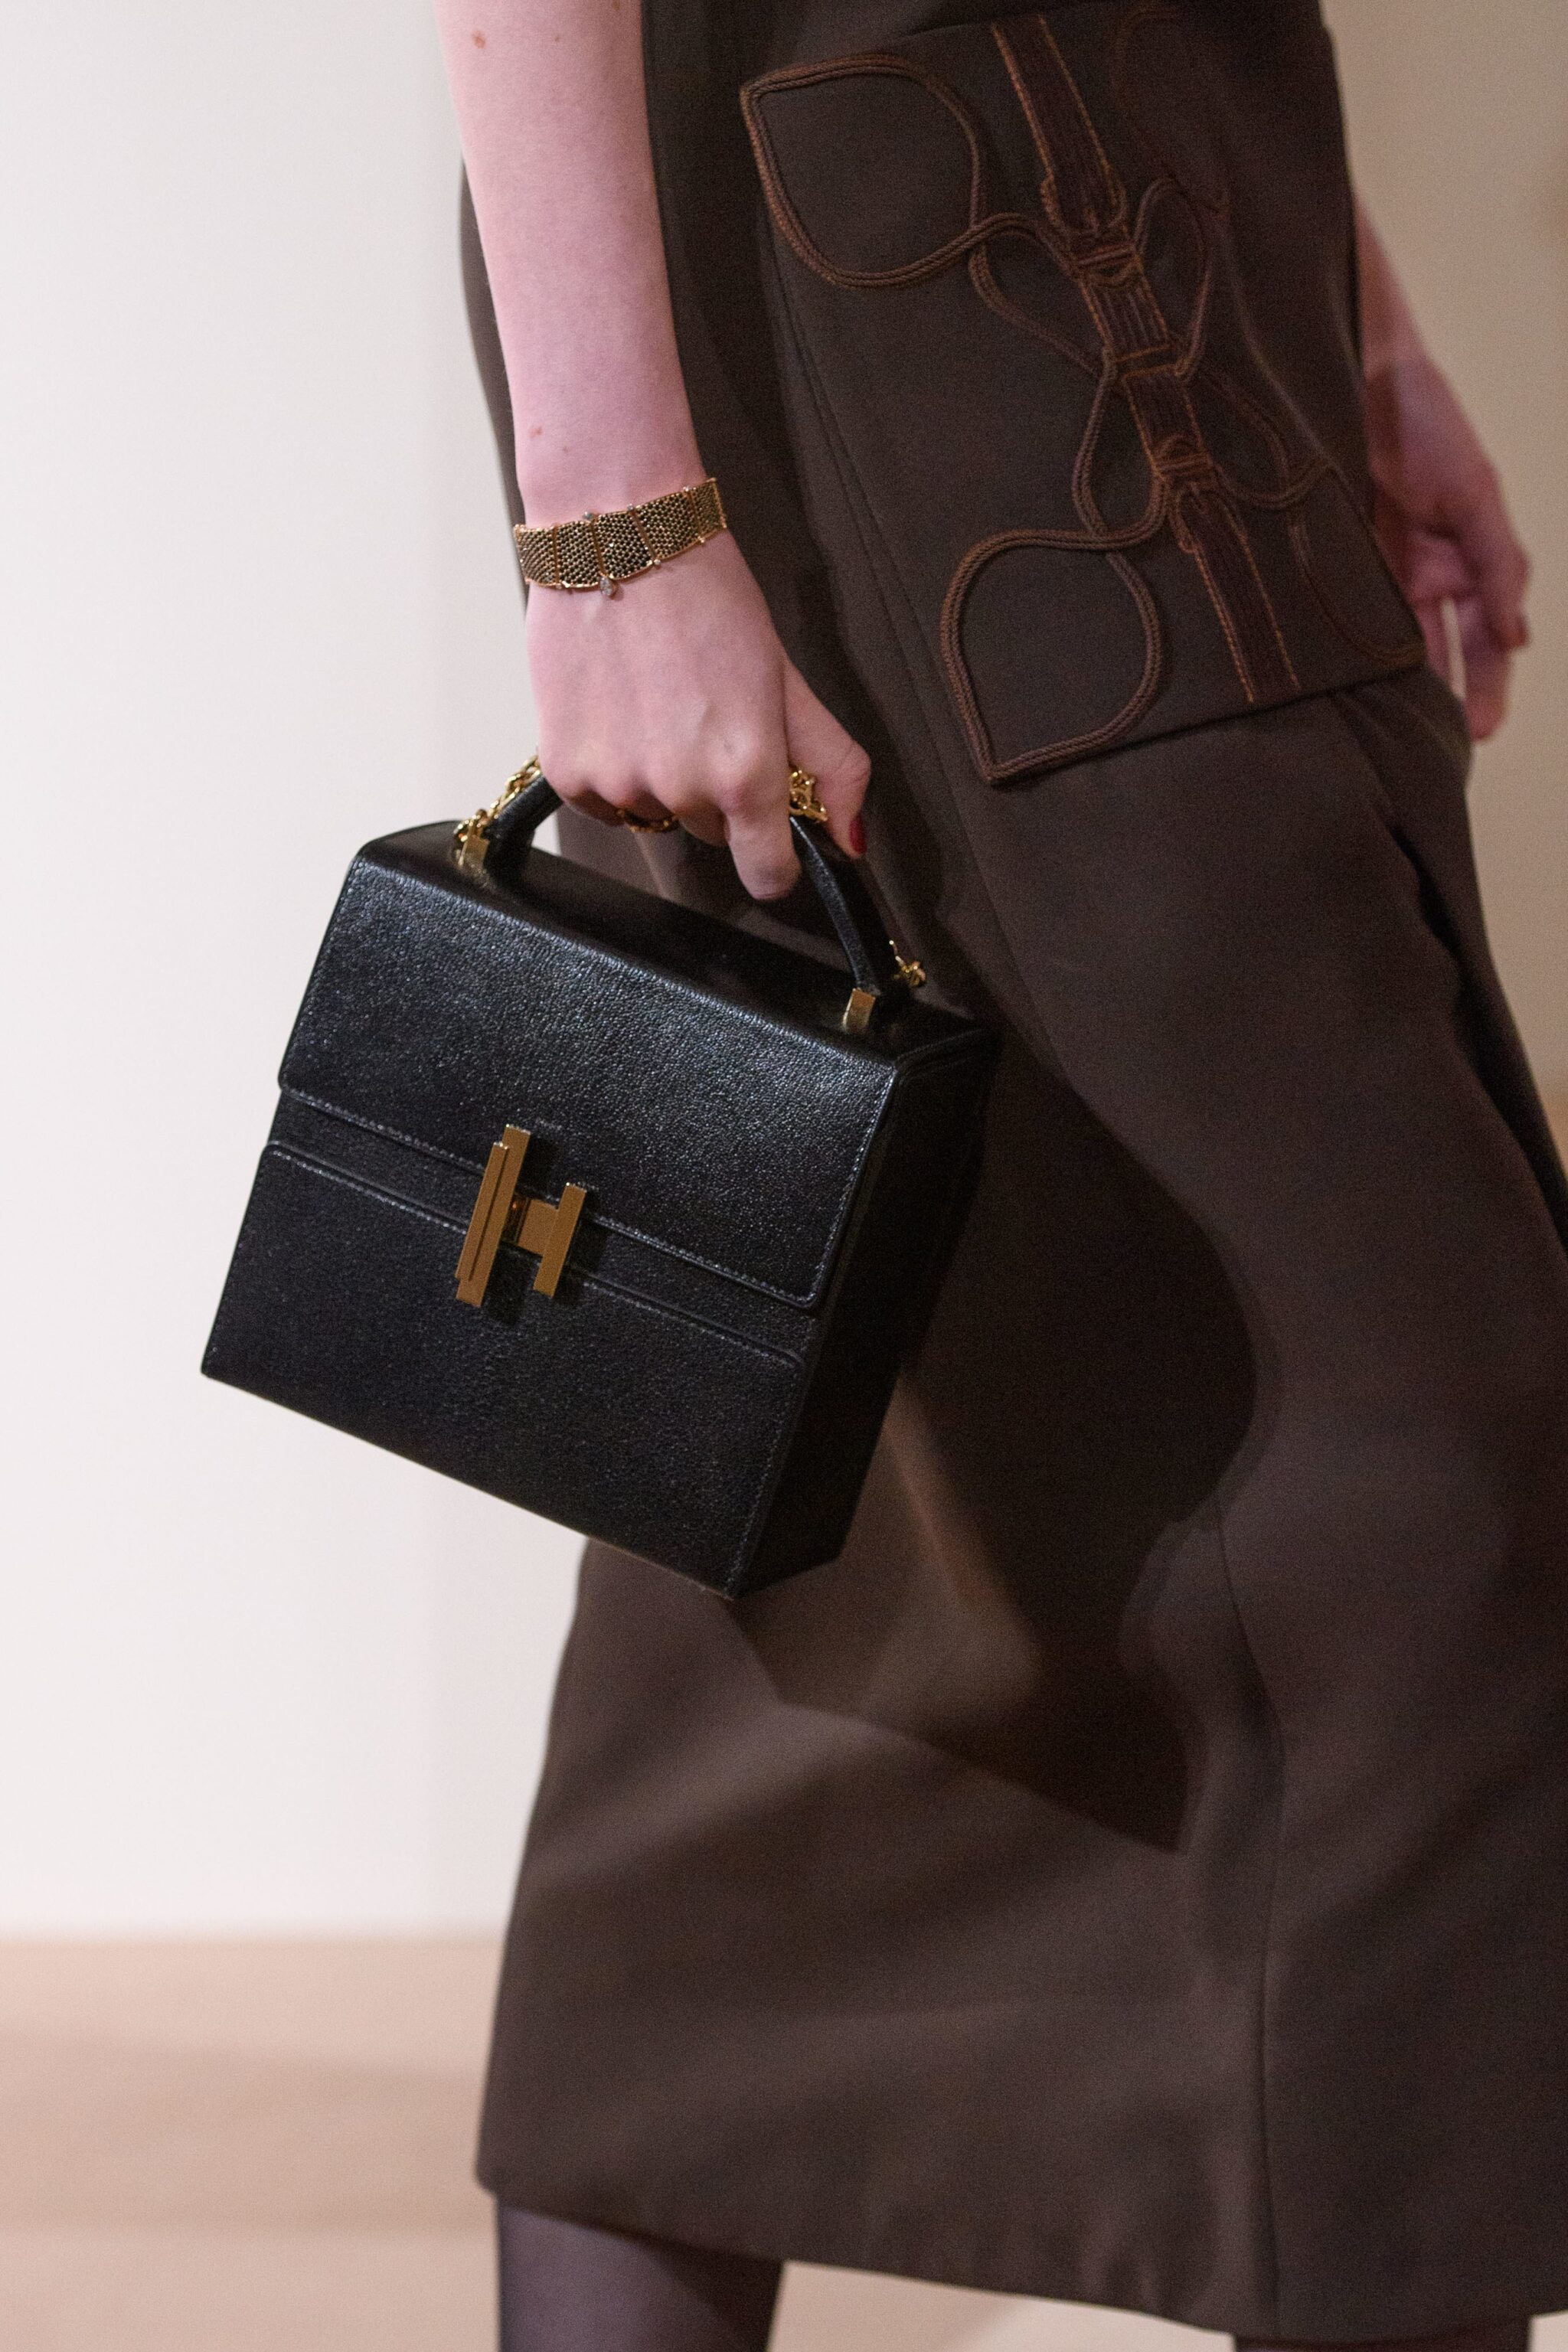 Hermes Pre-Fall 2019 Runway Bag Collection | Spotted Fashion